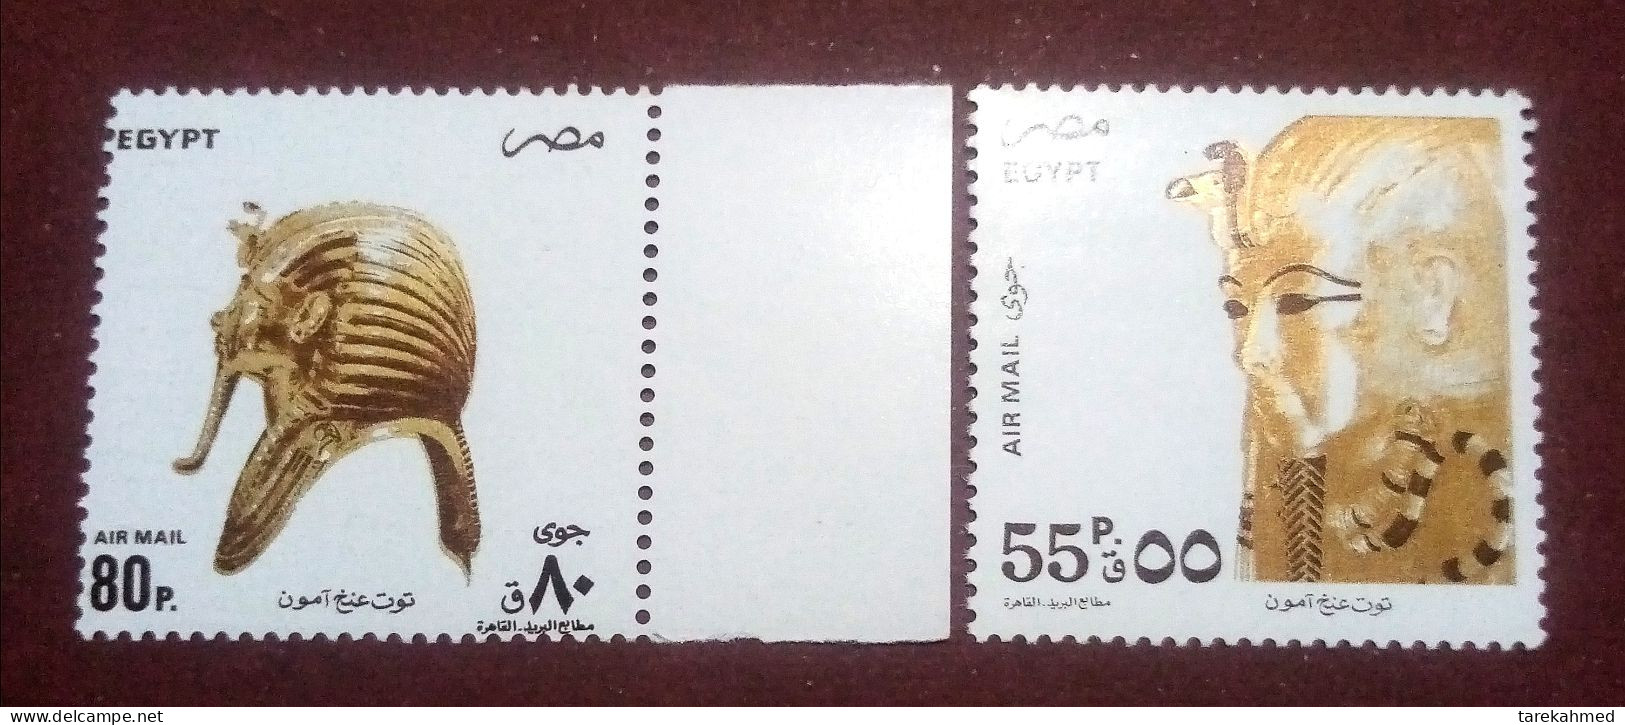 EGYPT -1993 - Airmail Set Of Amenhotep III  & Tut Anch Amon, MNH - Used Stamps